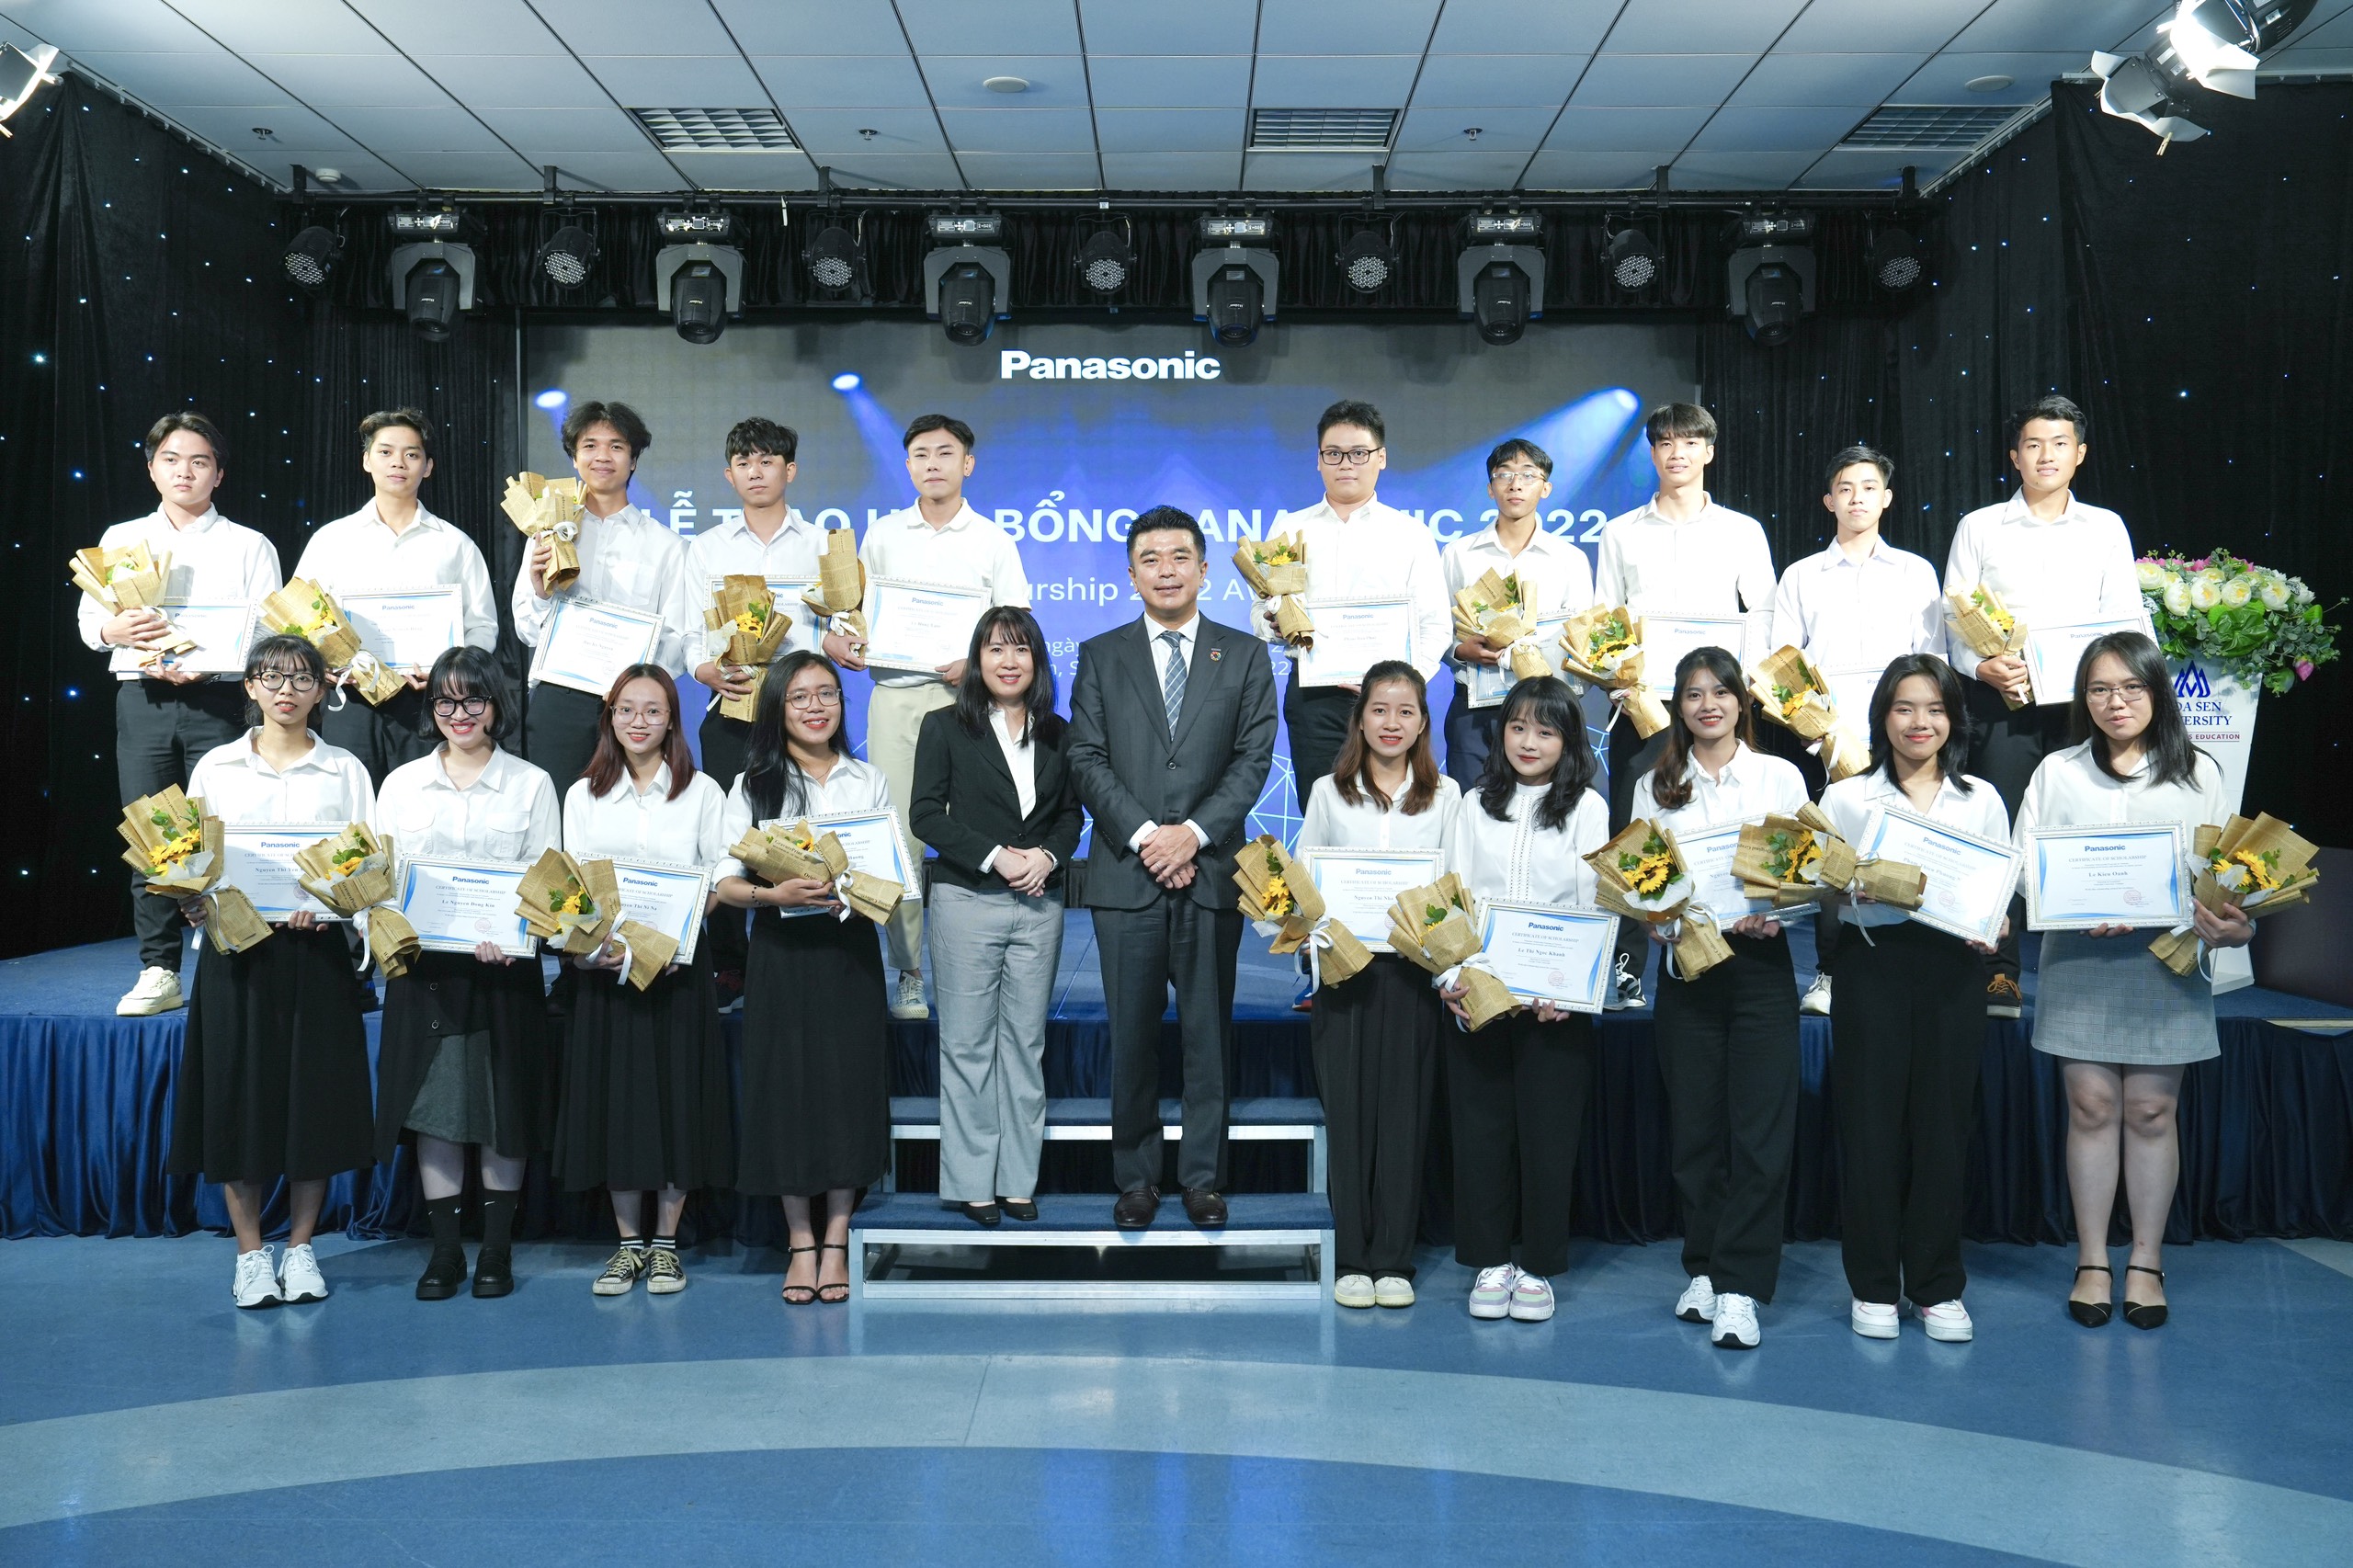 Panasonic enhance the scholarship program, offer more studying opportunities for Vietnamese talented students